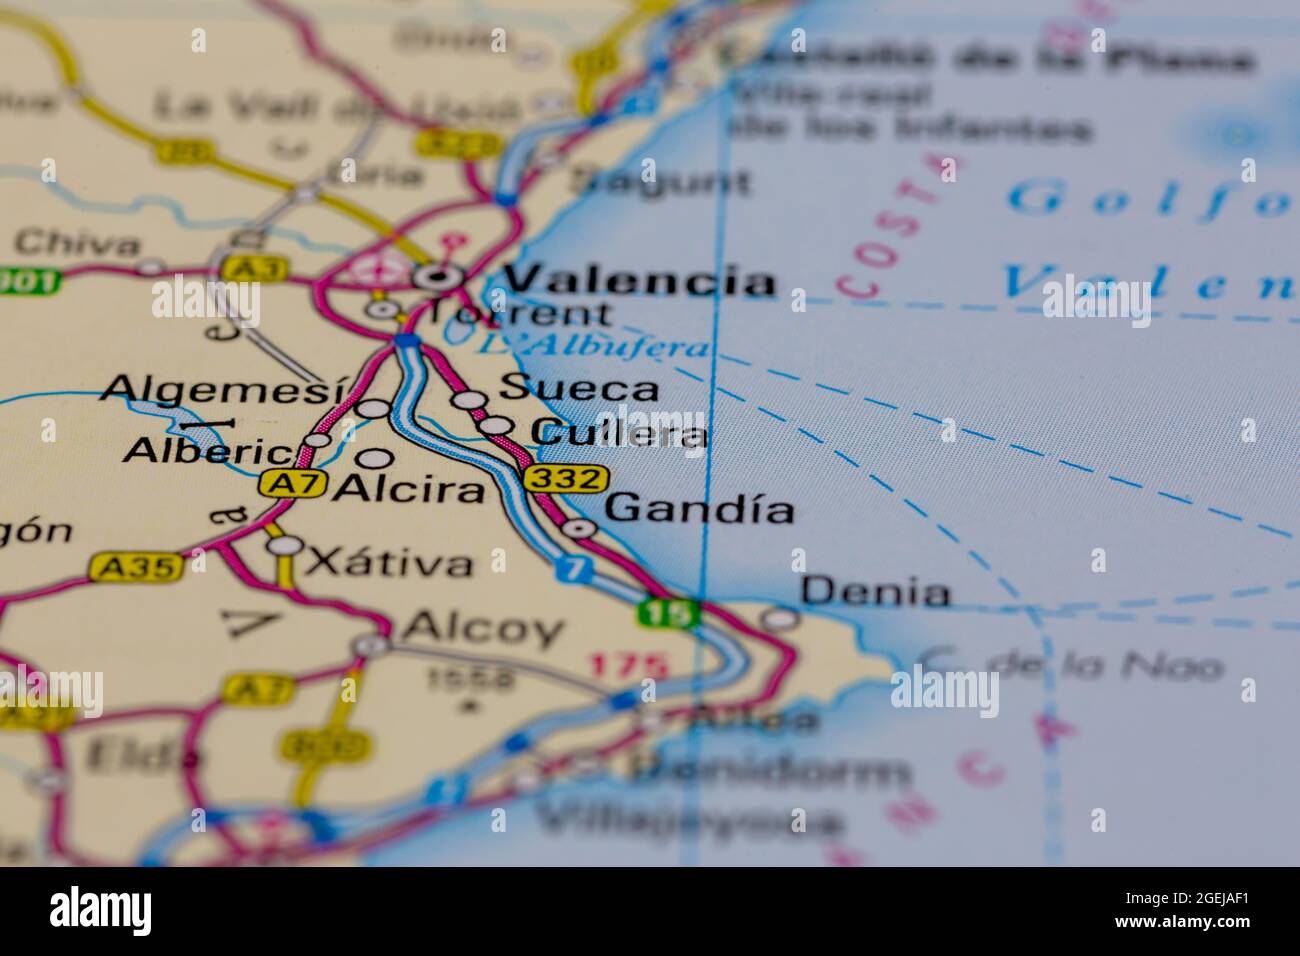 Cullera Spain shown on a road map or Geography map Stock Photo